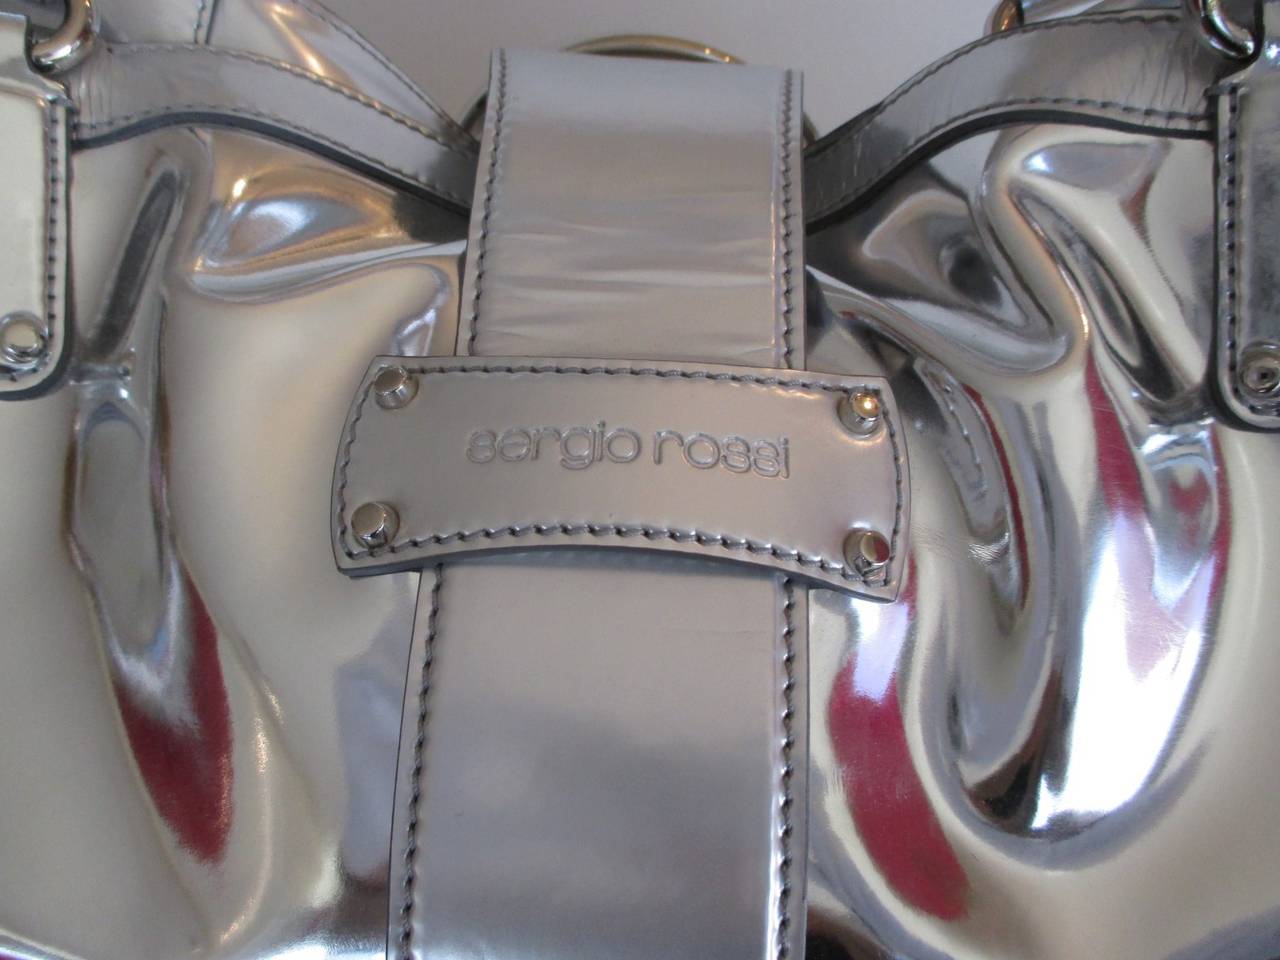 Exclusive Silver Leather Sergio Rossi handbag 
with card of authenticity.

We offer more exclusive items, view our frontstore

Please note that vintage items are not new and therefore might have minor imperfections.
